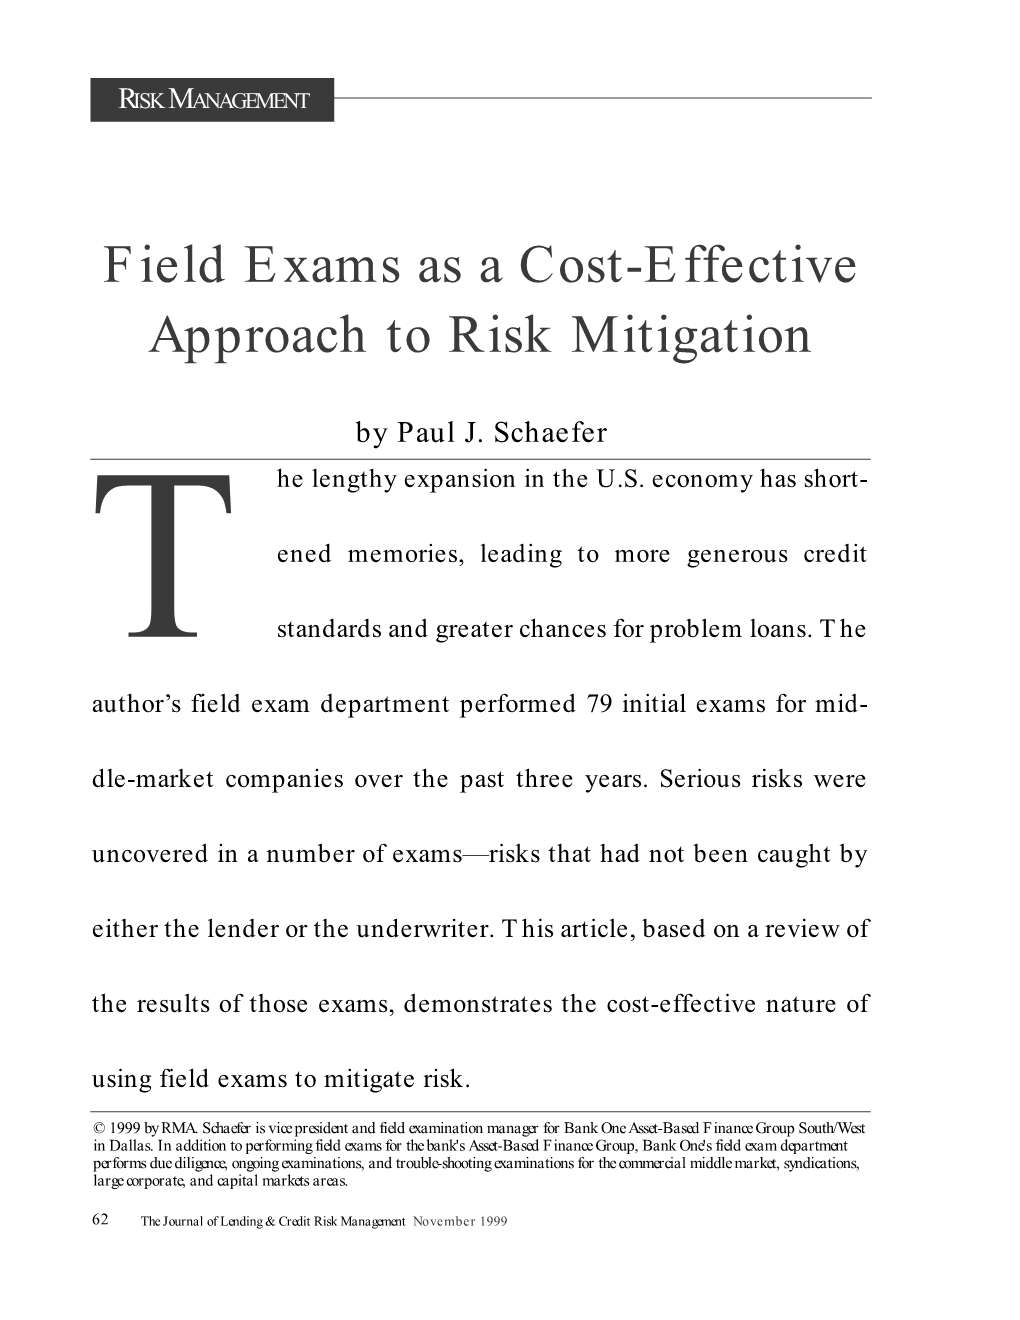 Field Exams As a Cost-Effective Approach to Risk Mitigation